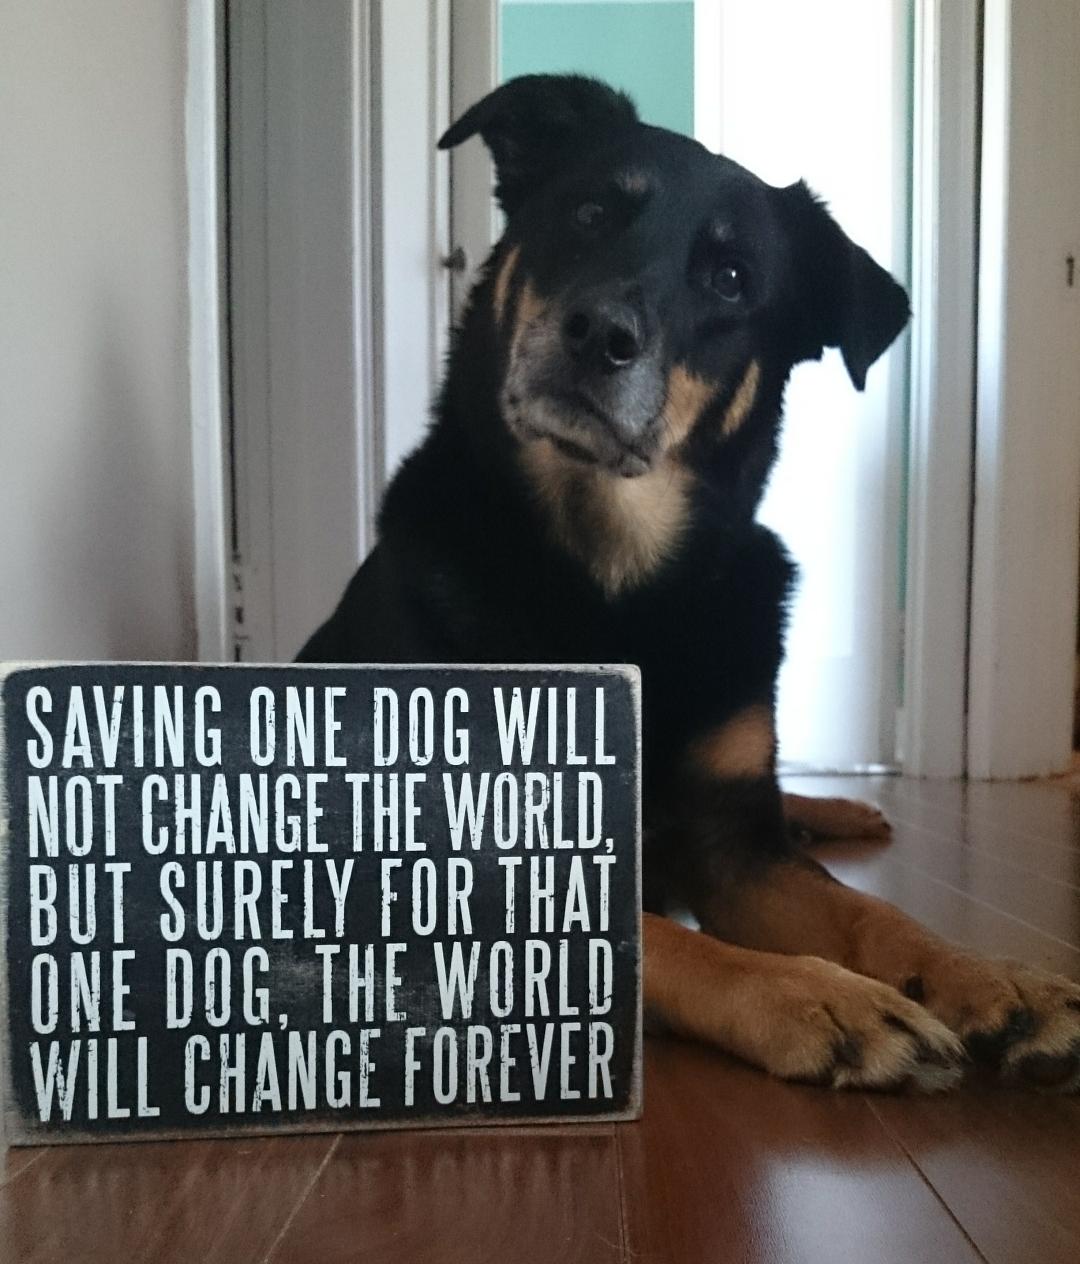 kids capers - Saving One Dog Will Not Change The World, But Surely For That One Dog, The World I Will Change Forever